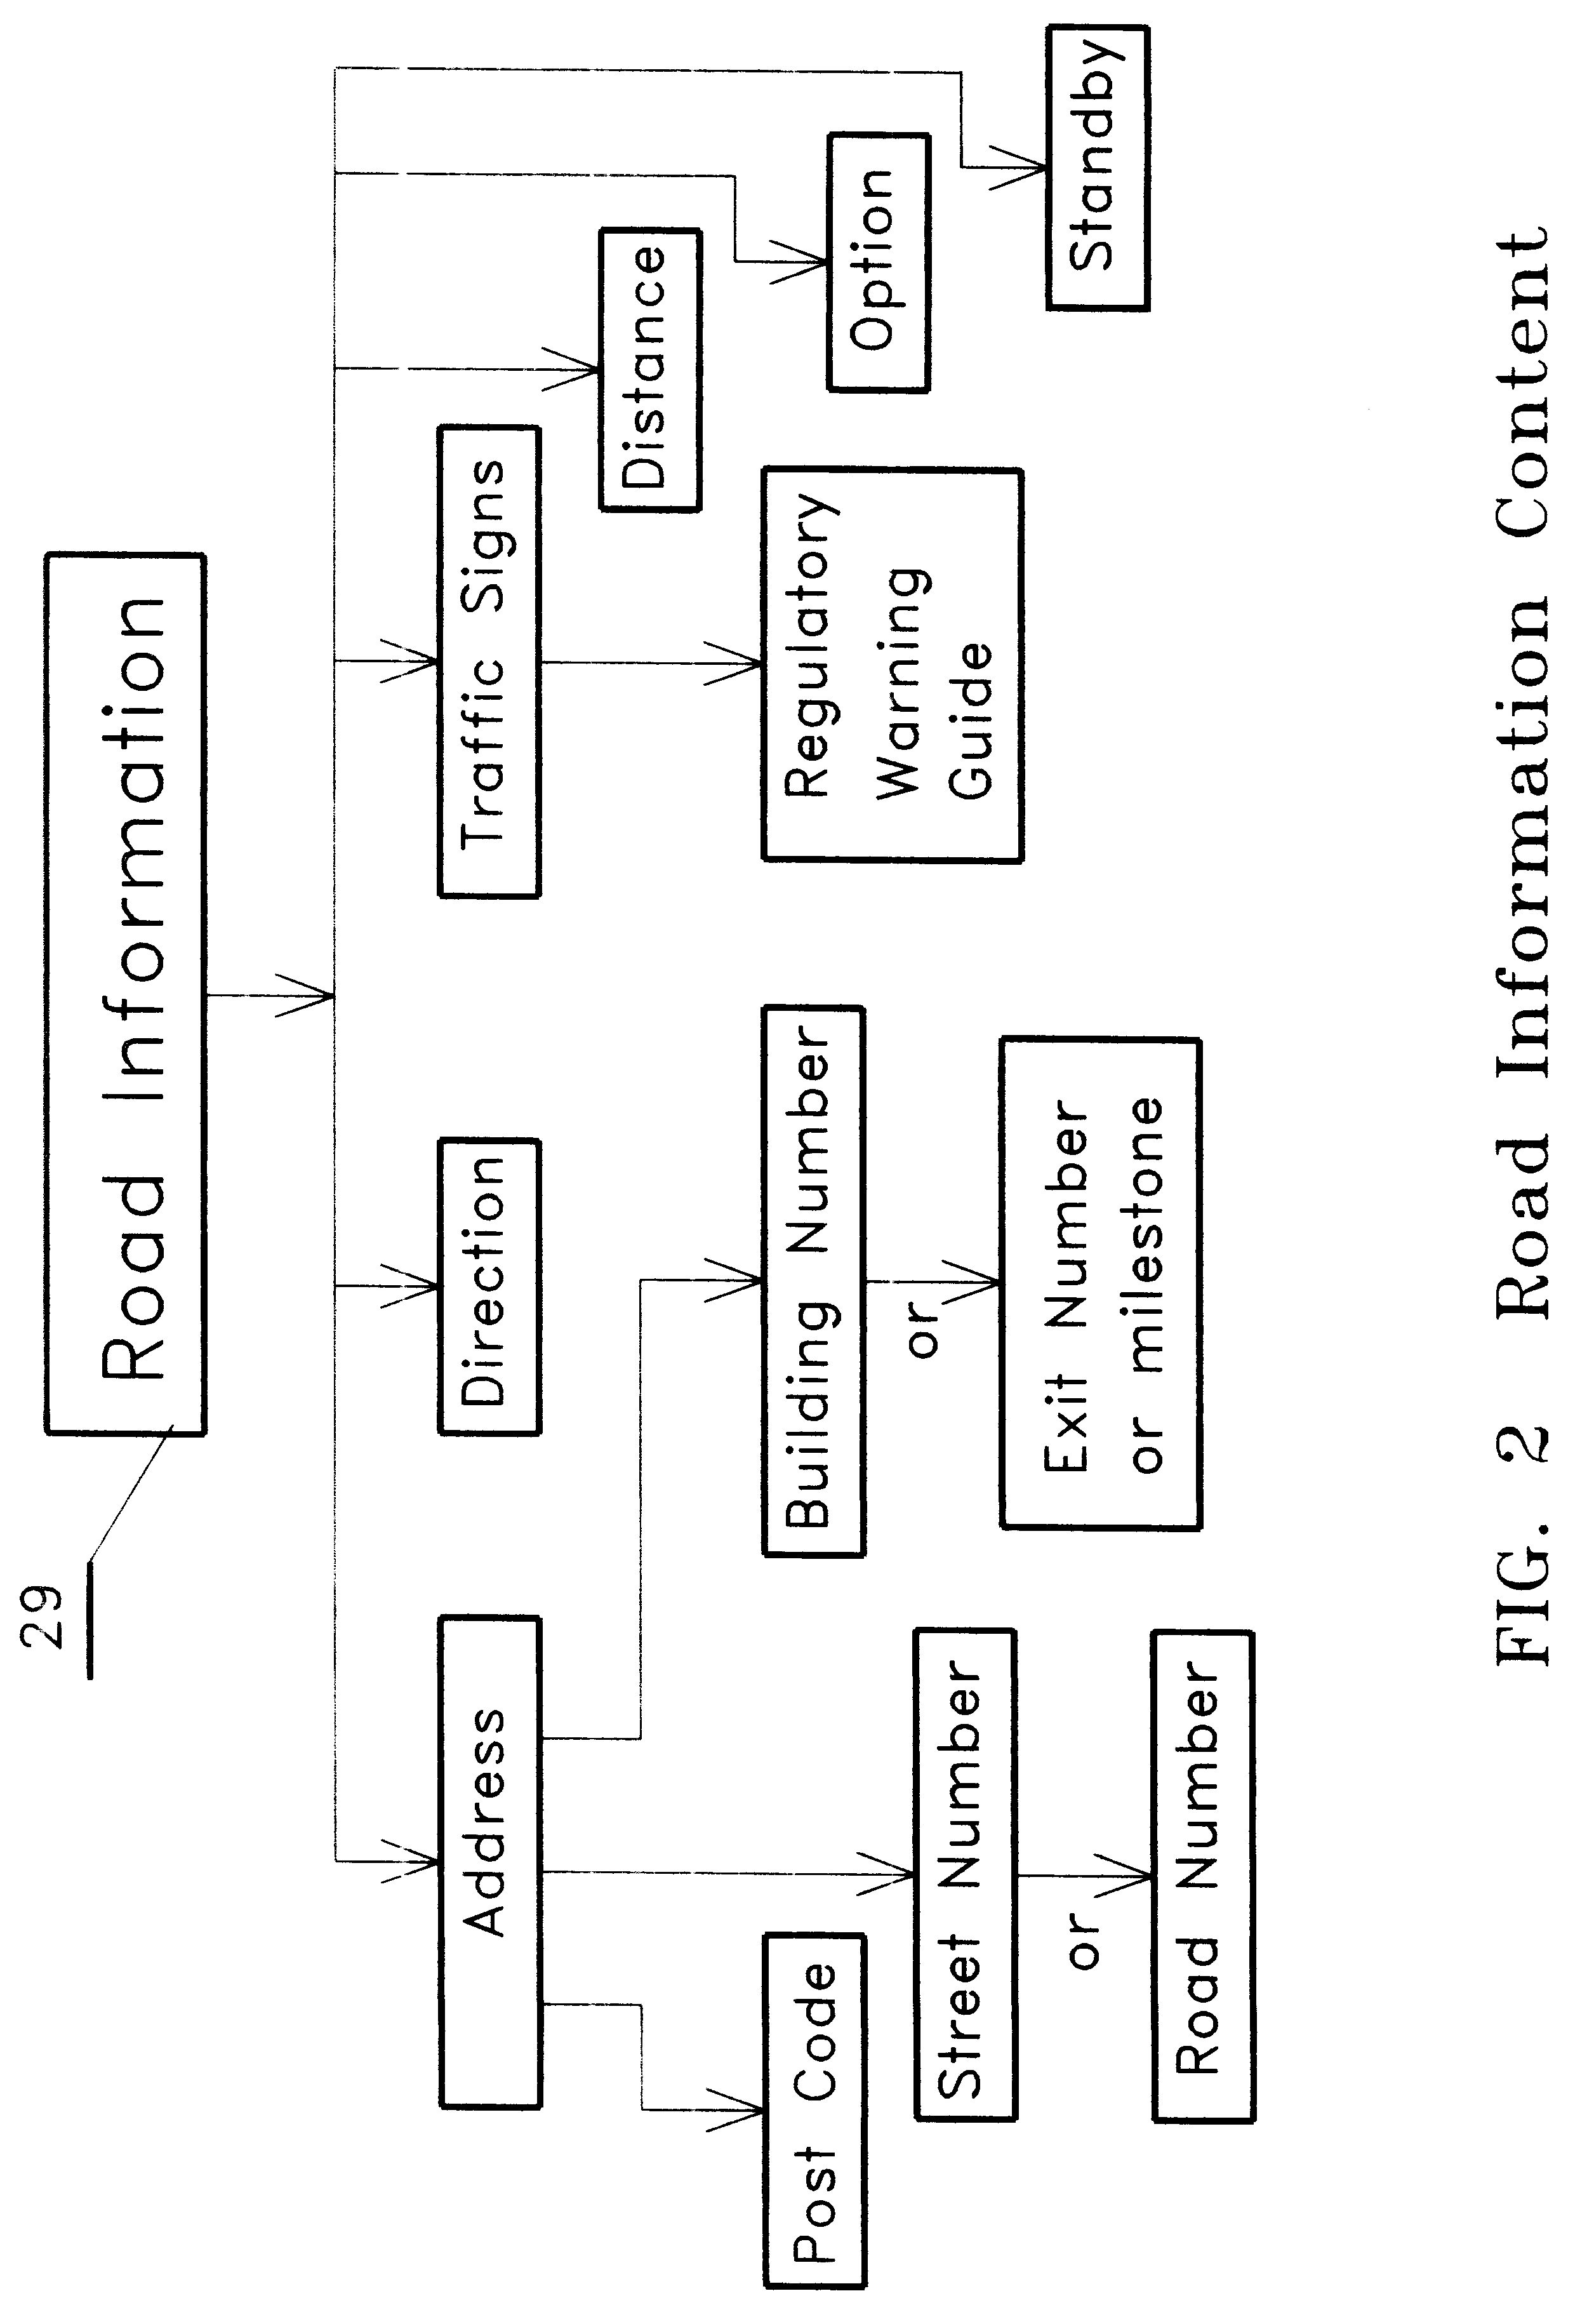 System for automatically locating and directing a vehicle